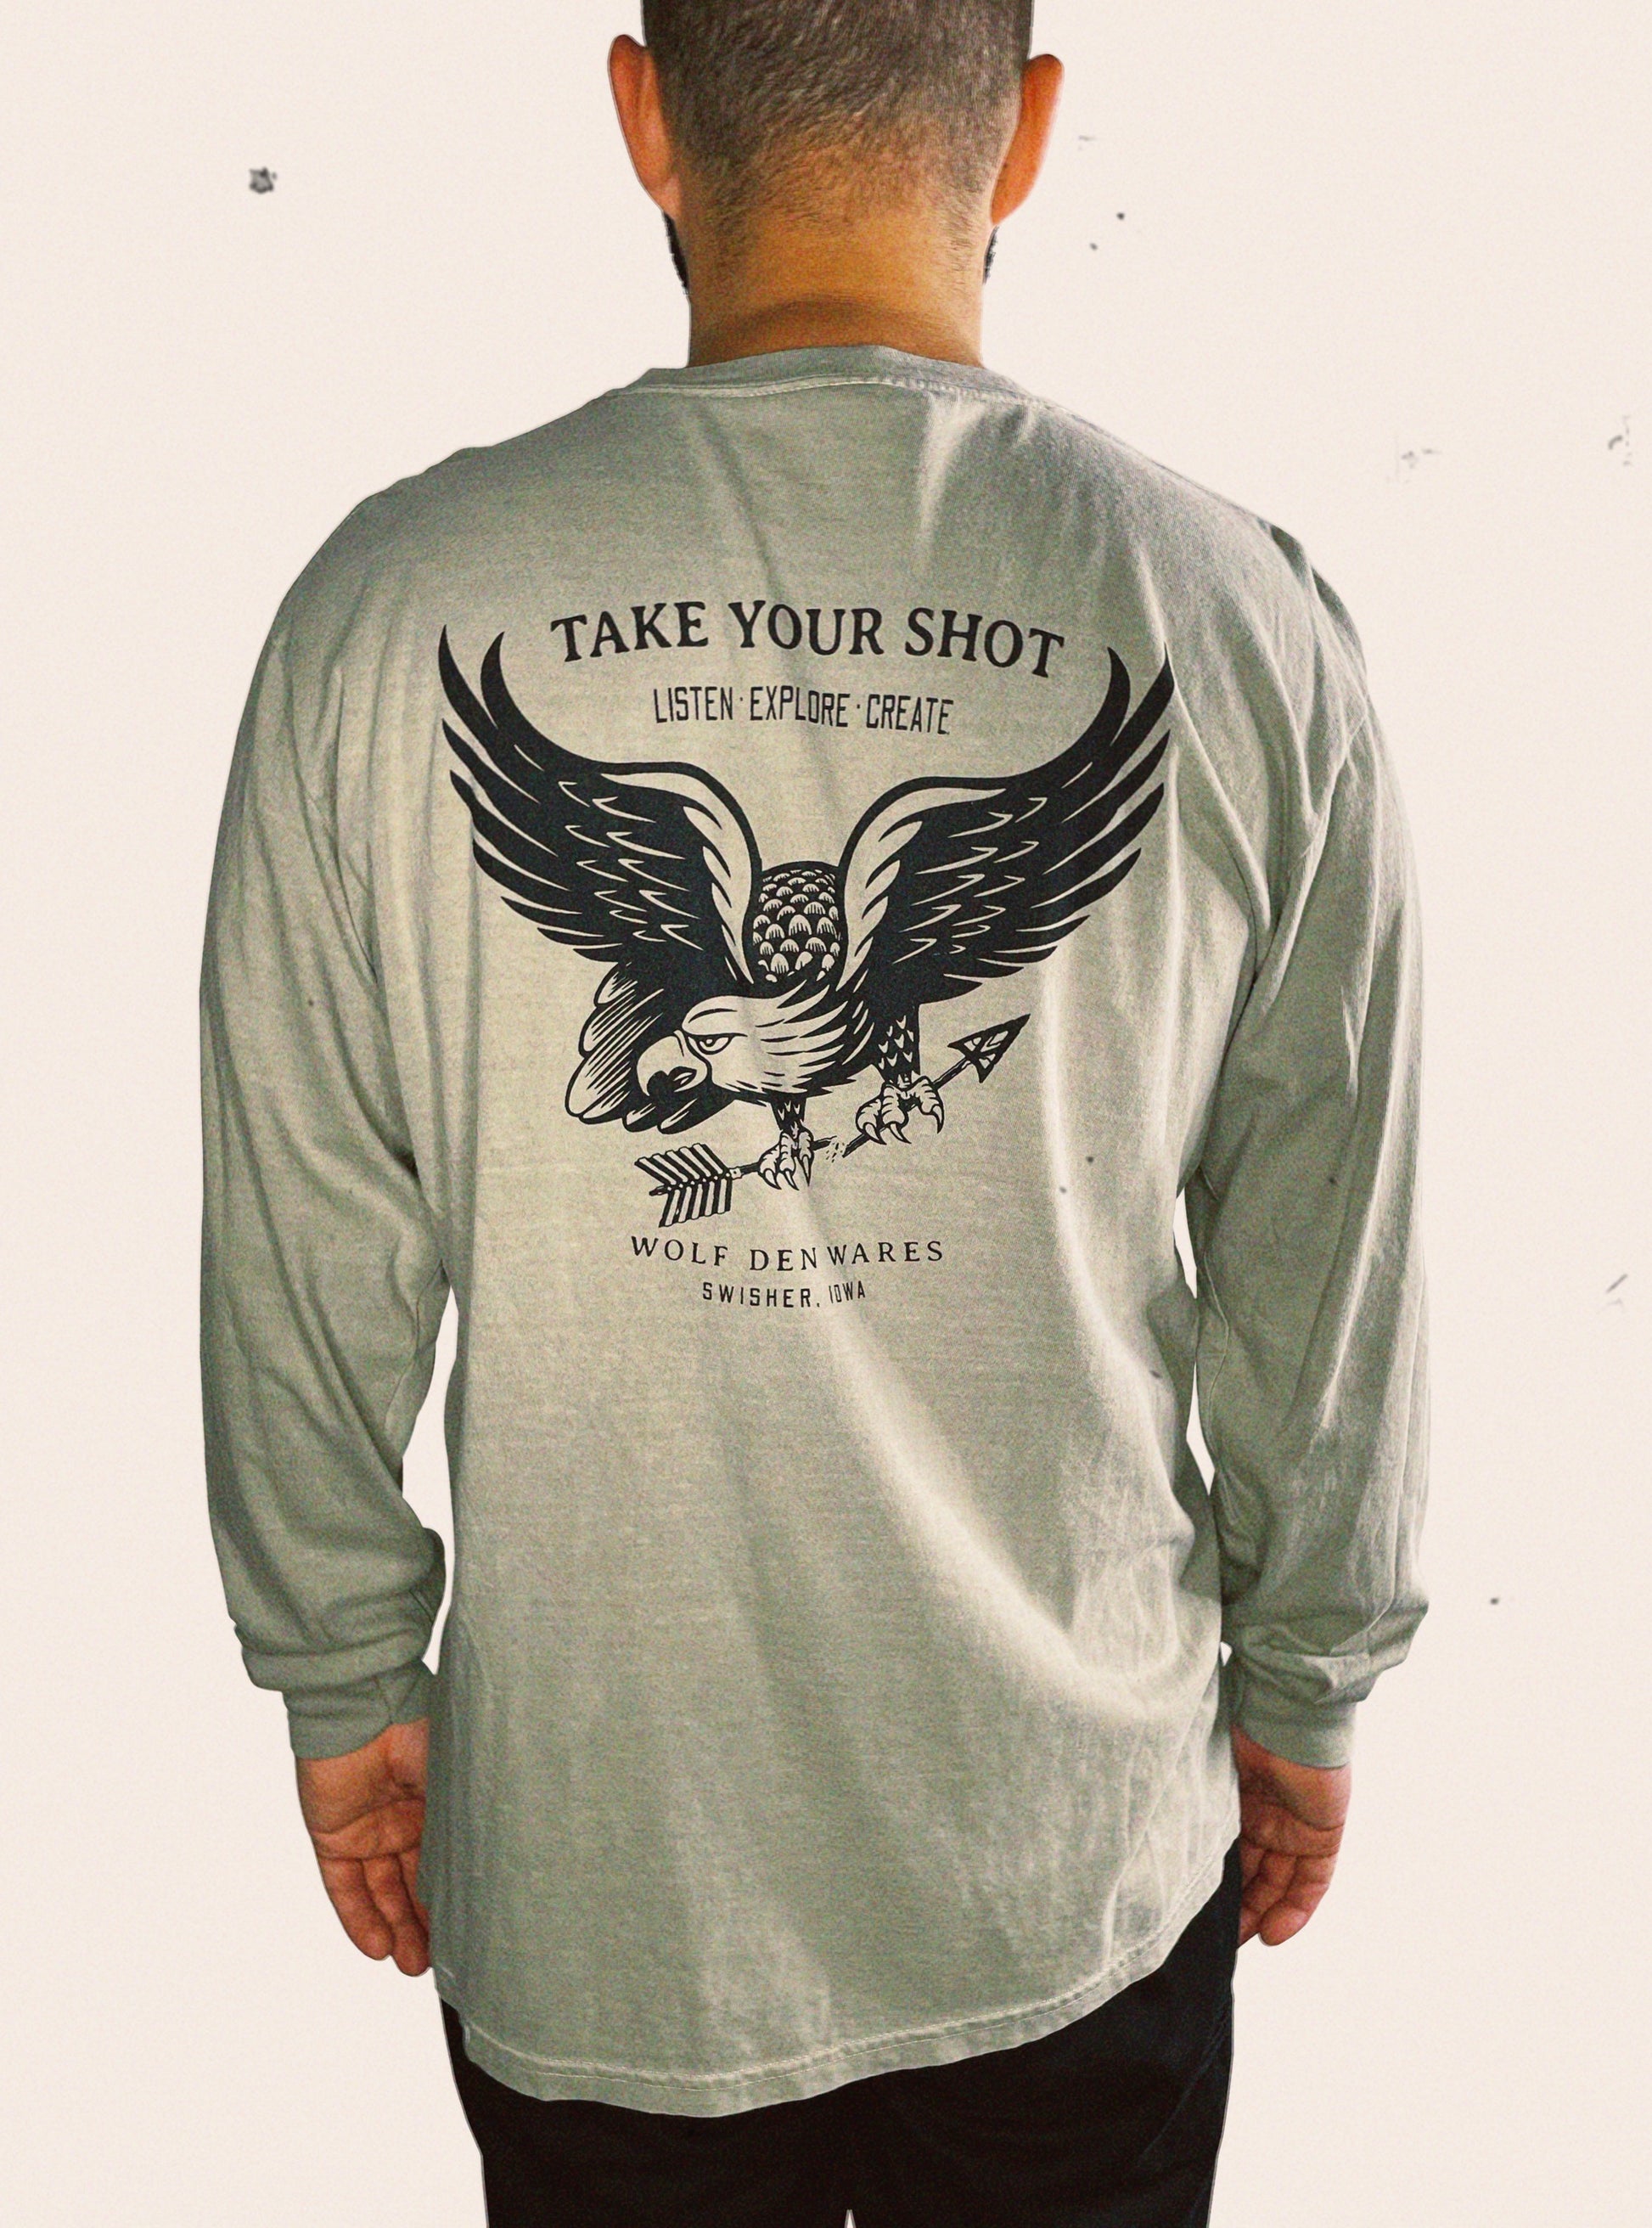 Sandstone Comfort Colors long sleeve embellished with an eagle and the words TAKE YOUR SHOT, LISTEN EXPLORE CREATE, WOLF DEN WARES, SWISHER, IOWA